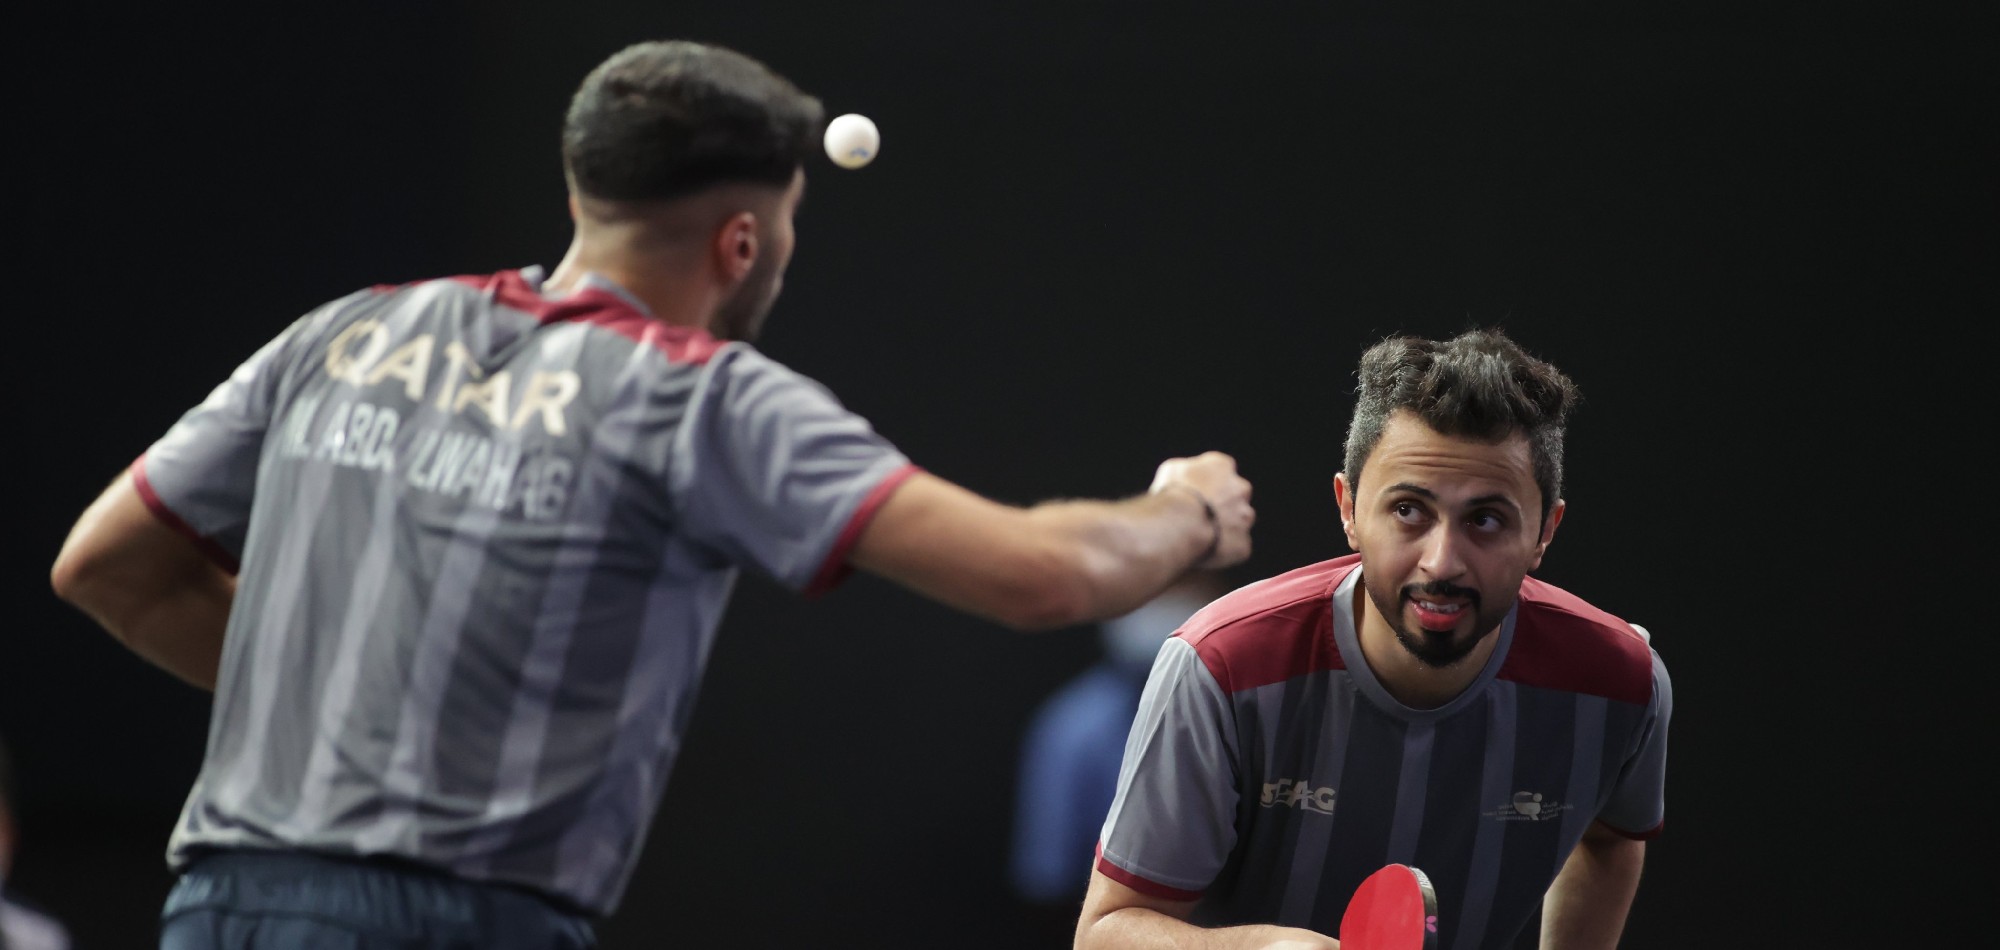 Al Mohannadi and Abdulwahhab made an early exit at the WTT Star Contender Championship in Qatar